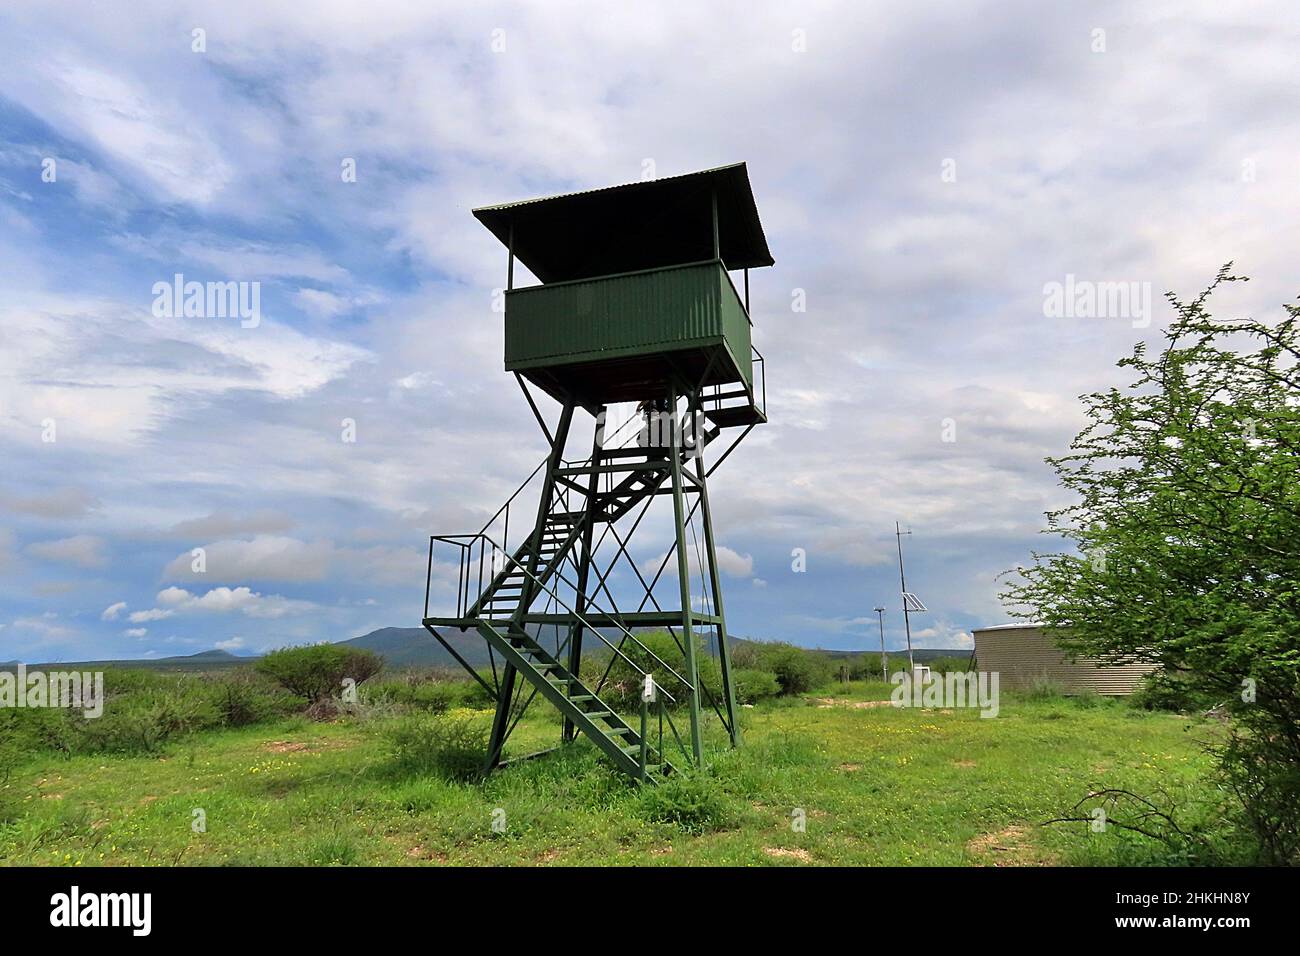 A fire watchtower at the Ondekaremba Game Reserve, Namibia during the wet season Stock Photo